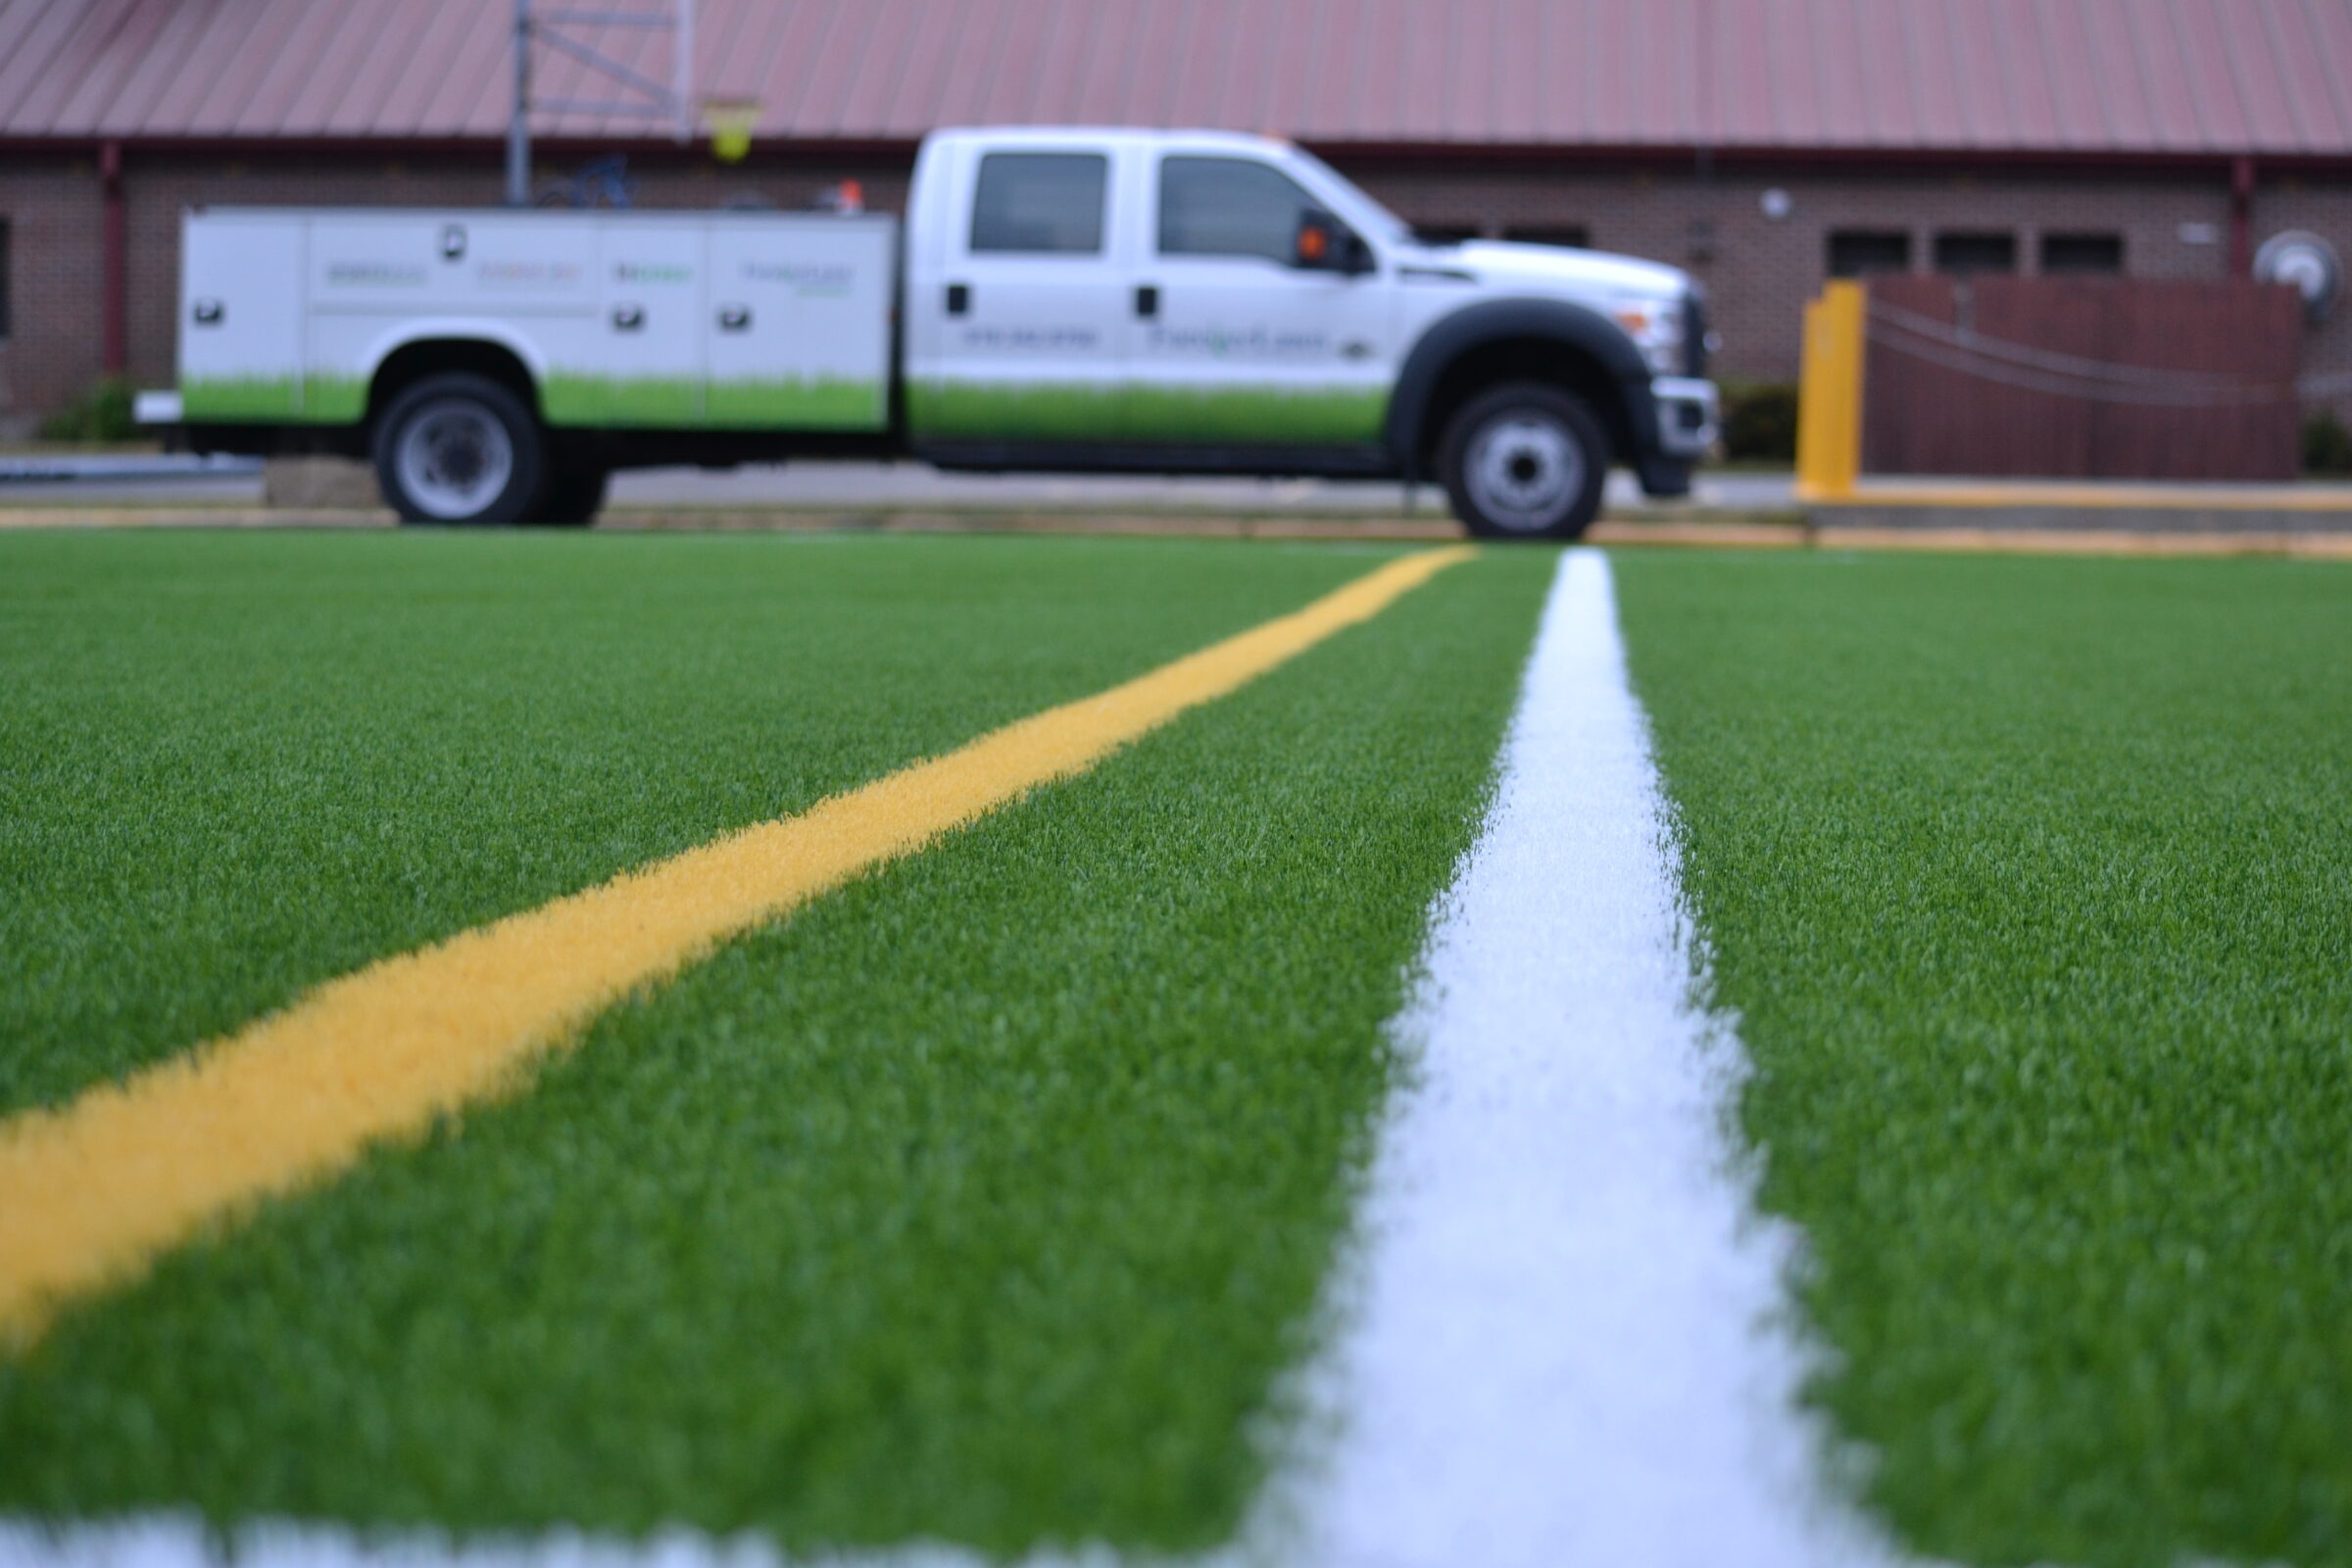 This image shows a close-up of white and yellow lines on lush green artificial turf, with a utility vehicle blurred in the background.